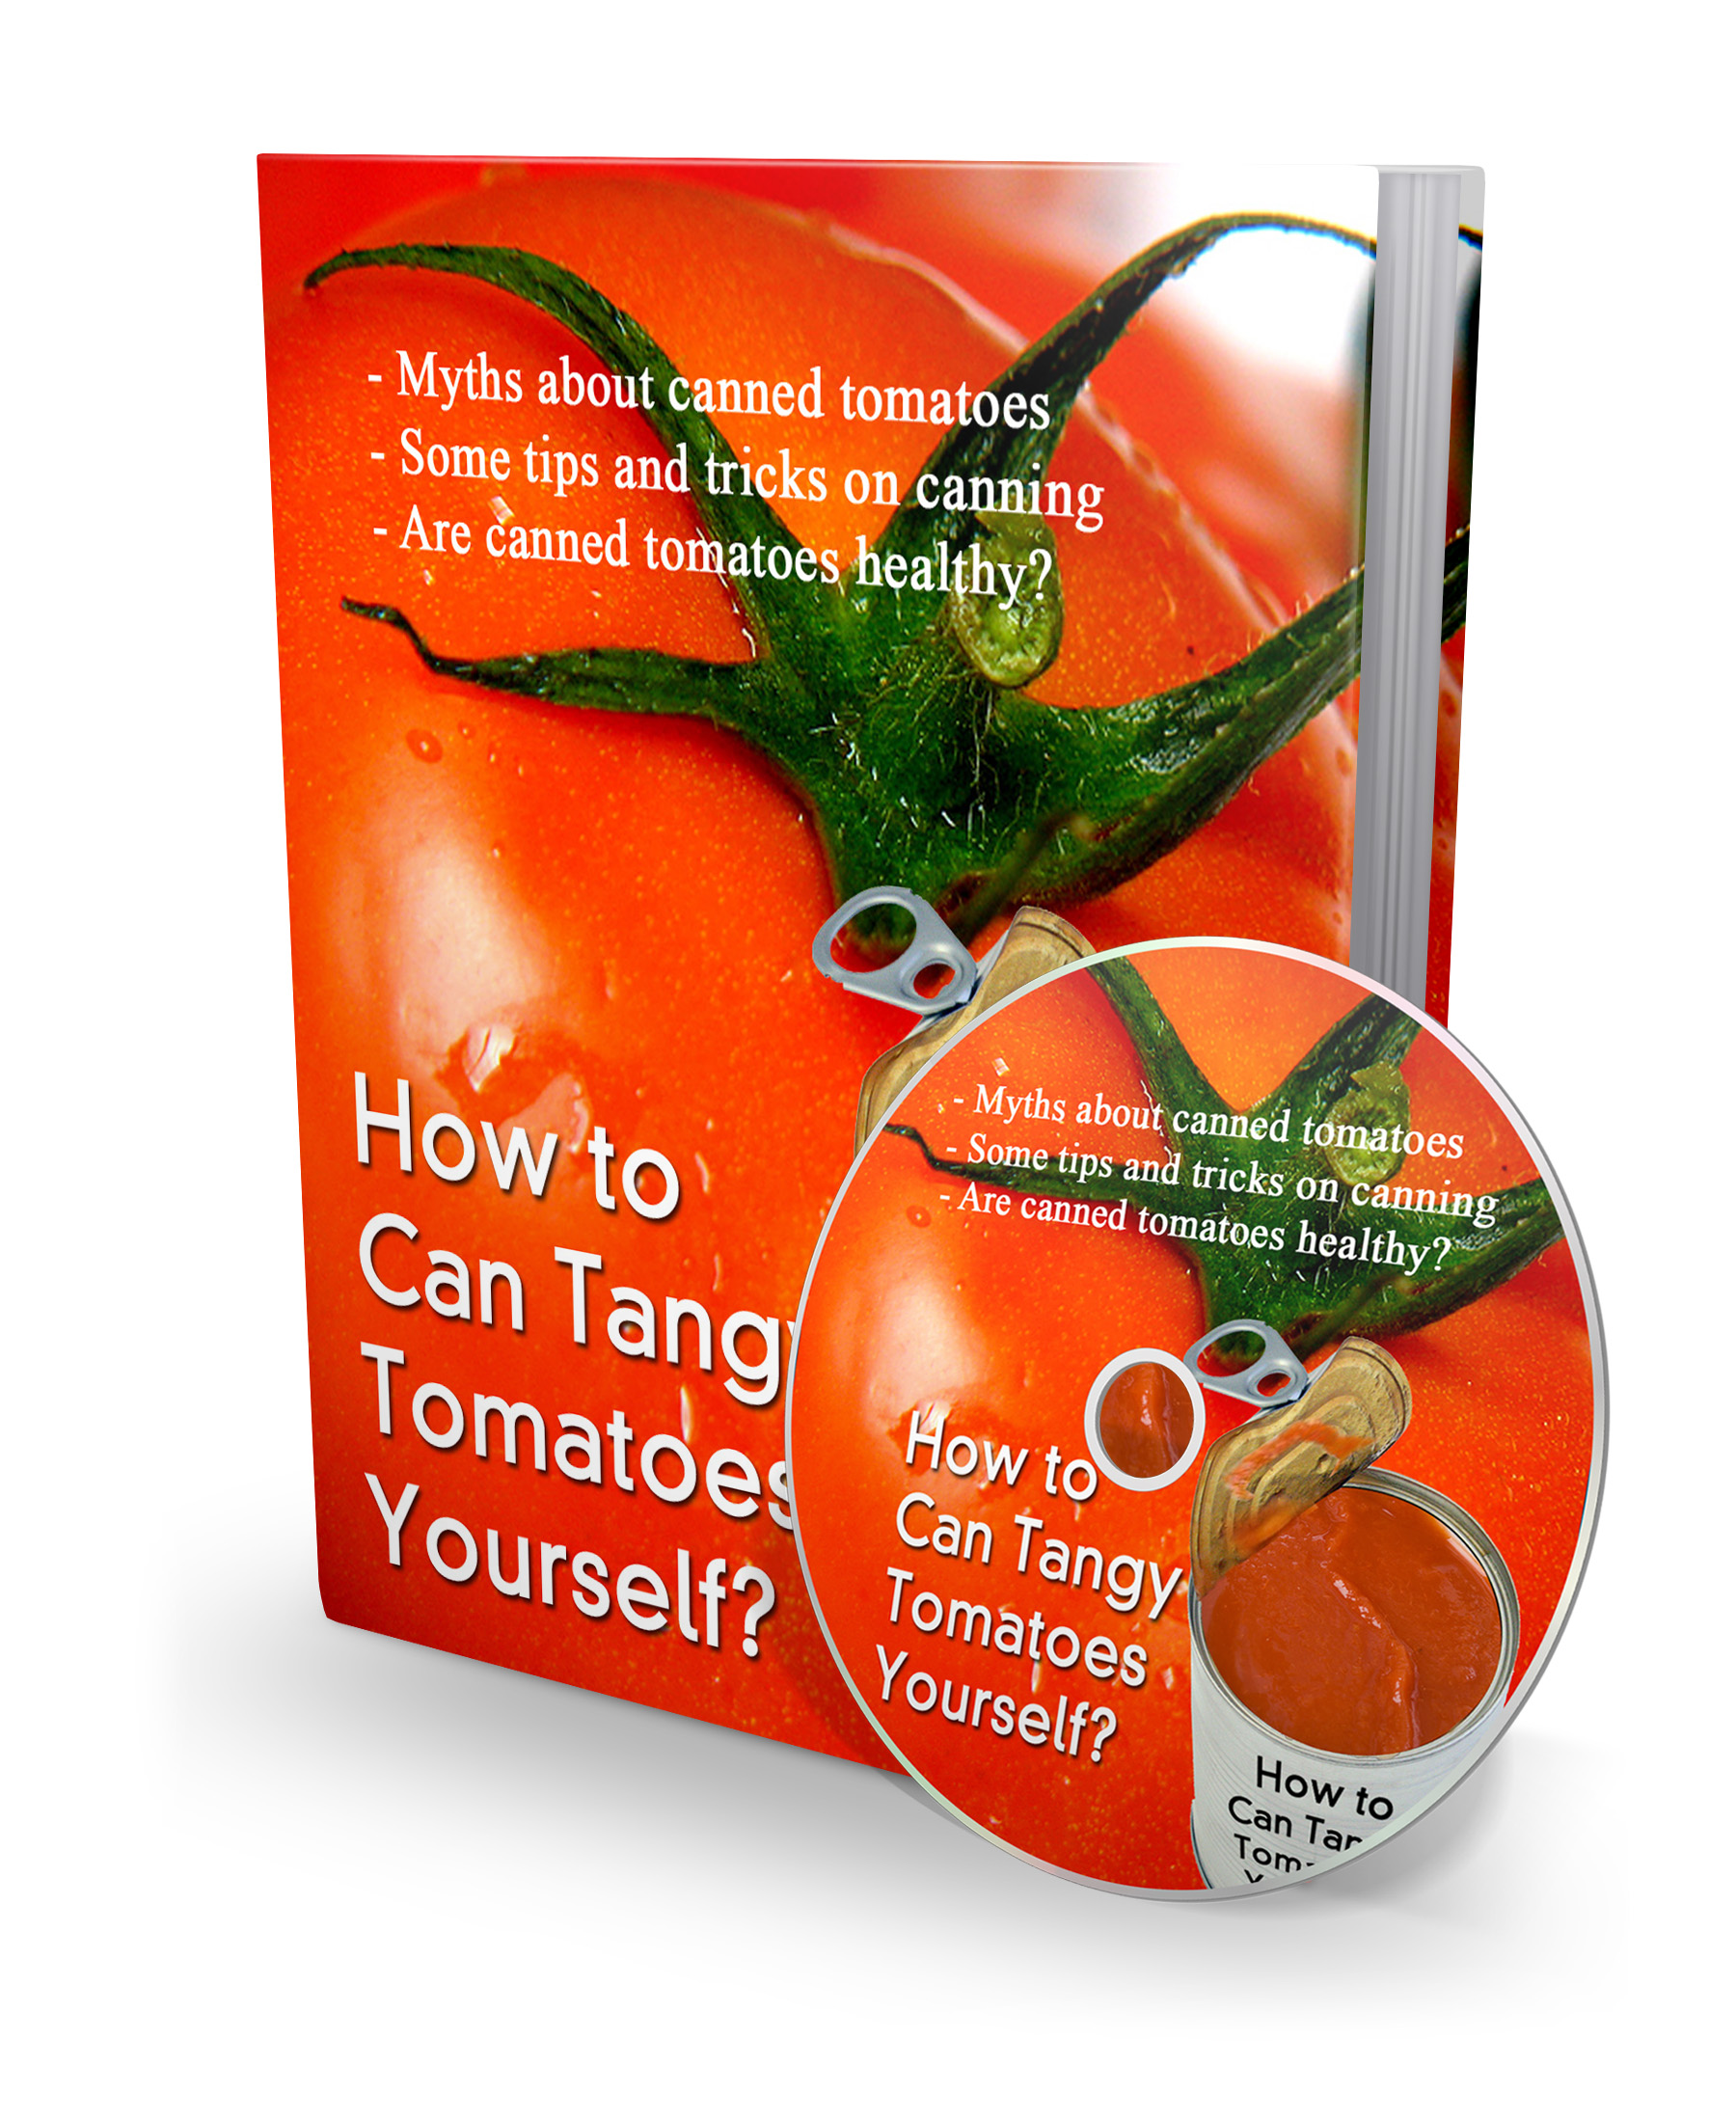 How To Can Tangy Tomatoes Yourself